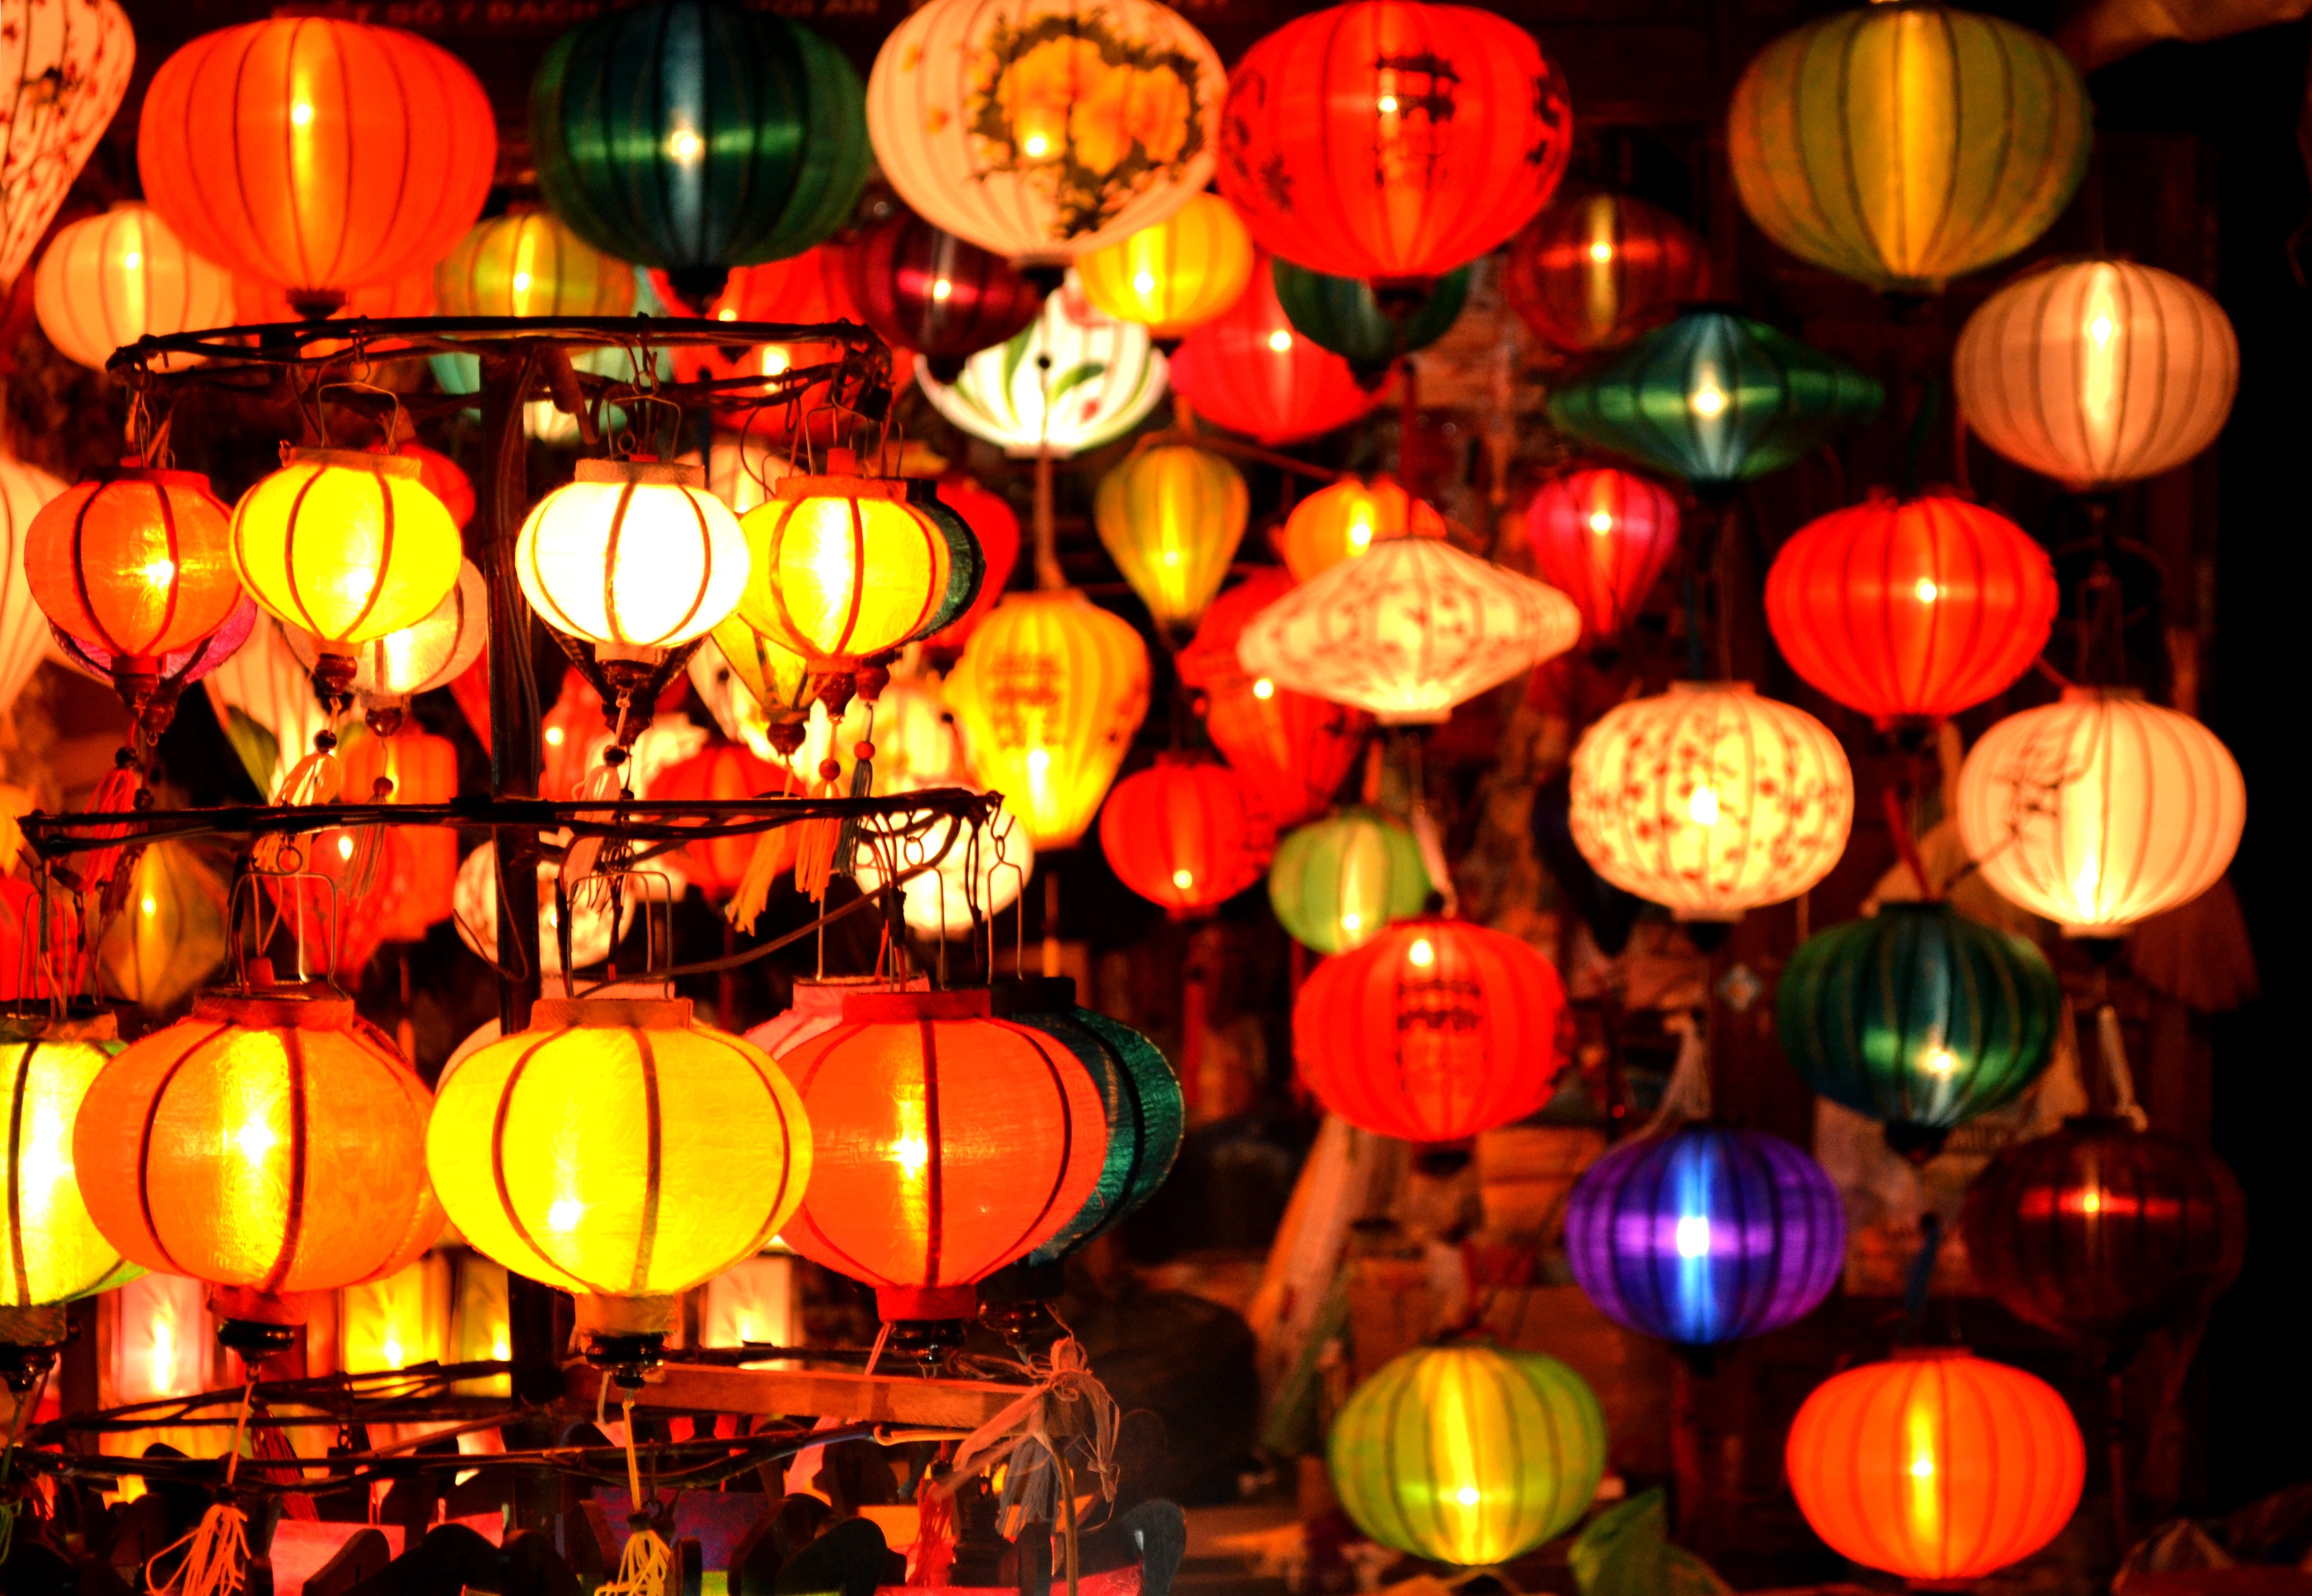 Free of colourful, hội an, lanterns